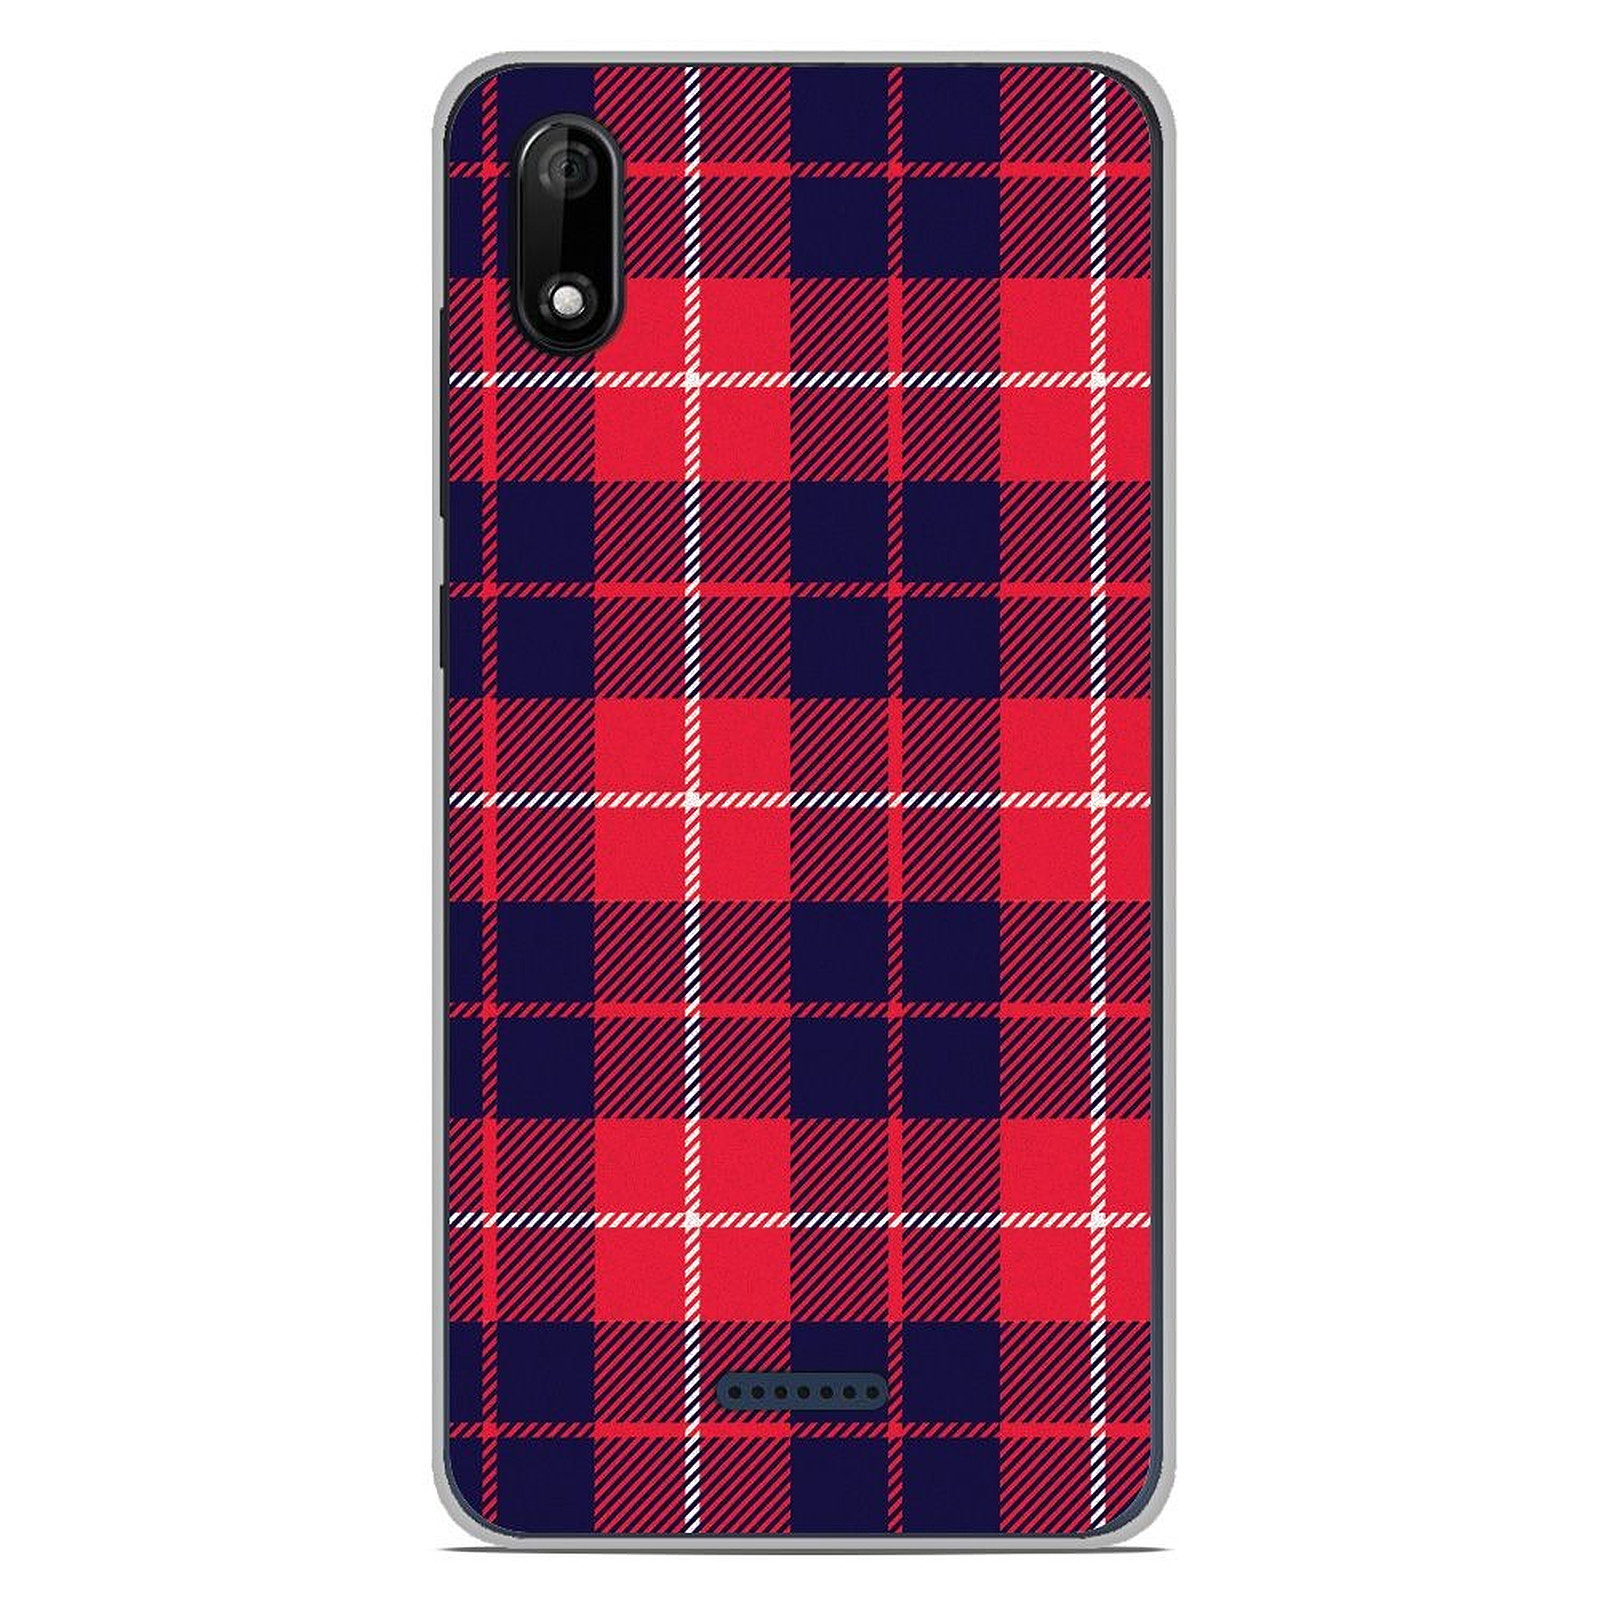 1001 Coques Coque silicone gel Wiko Y80 motif Tartan Rouge 2 - Coque telephone 1001Coques